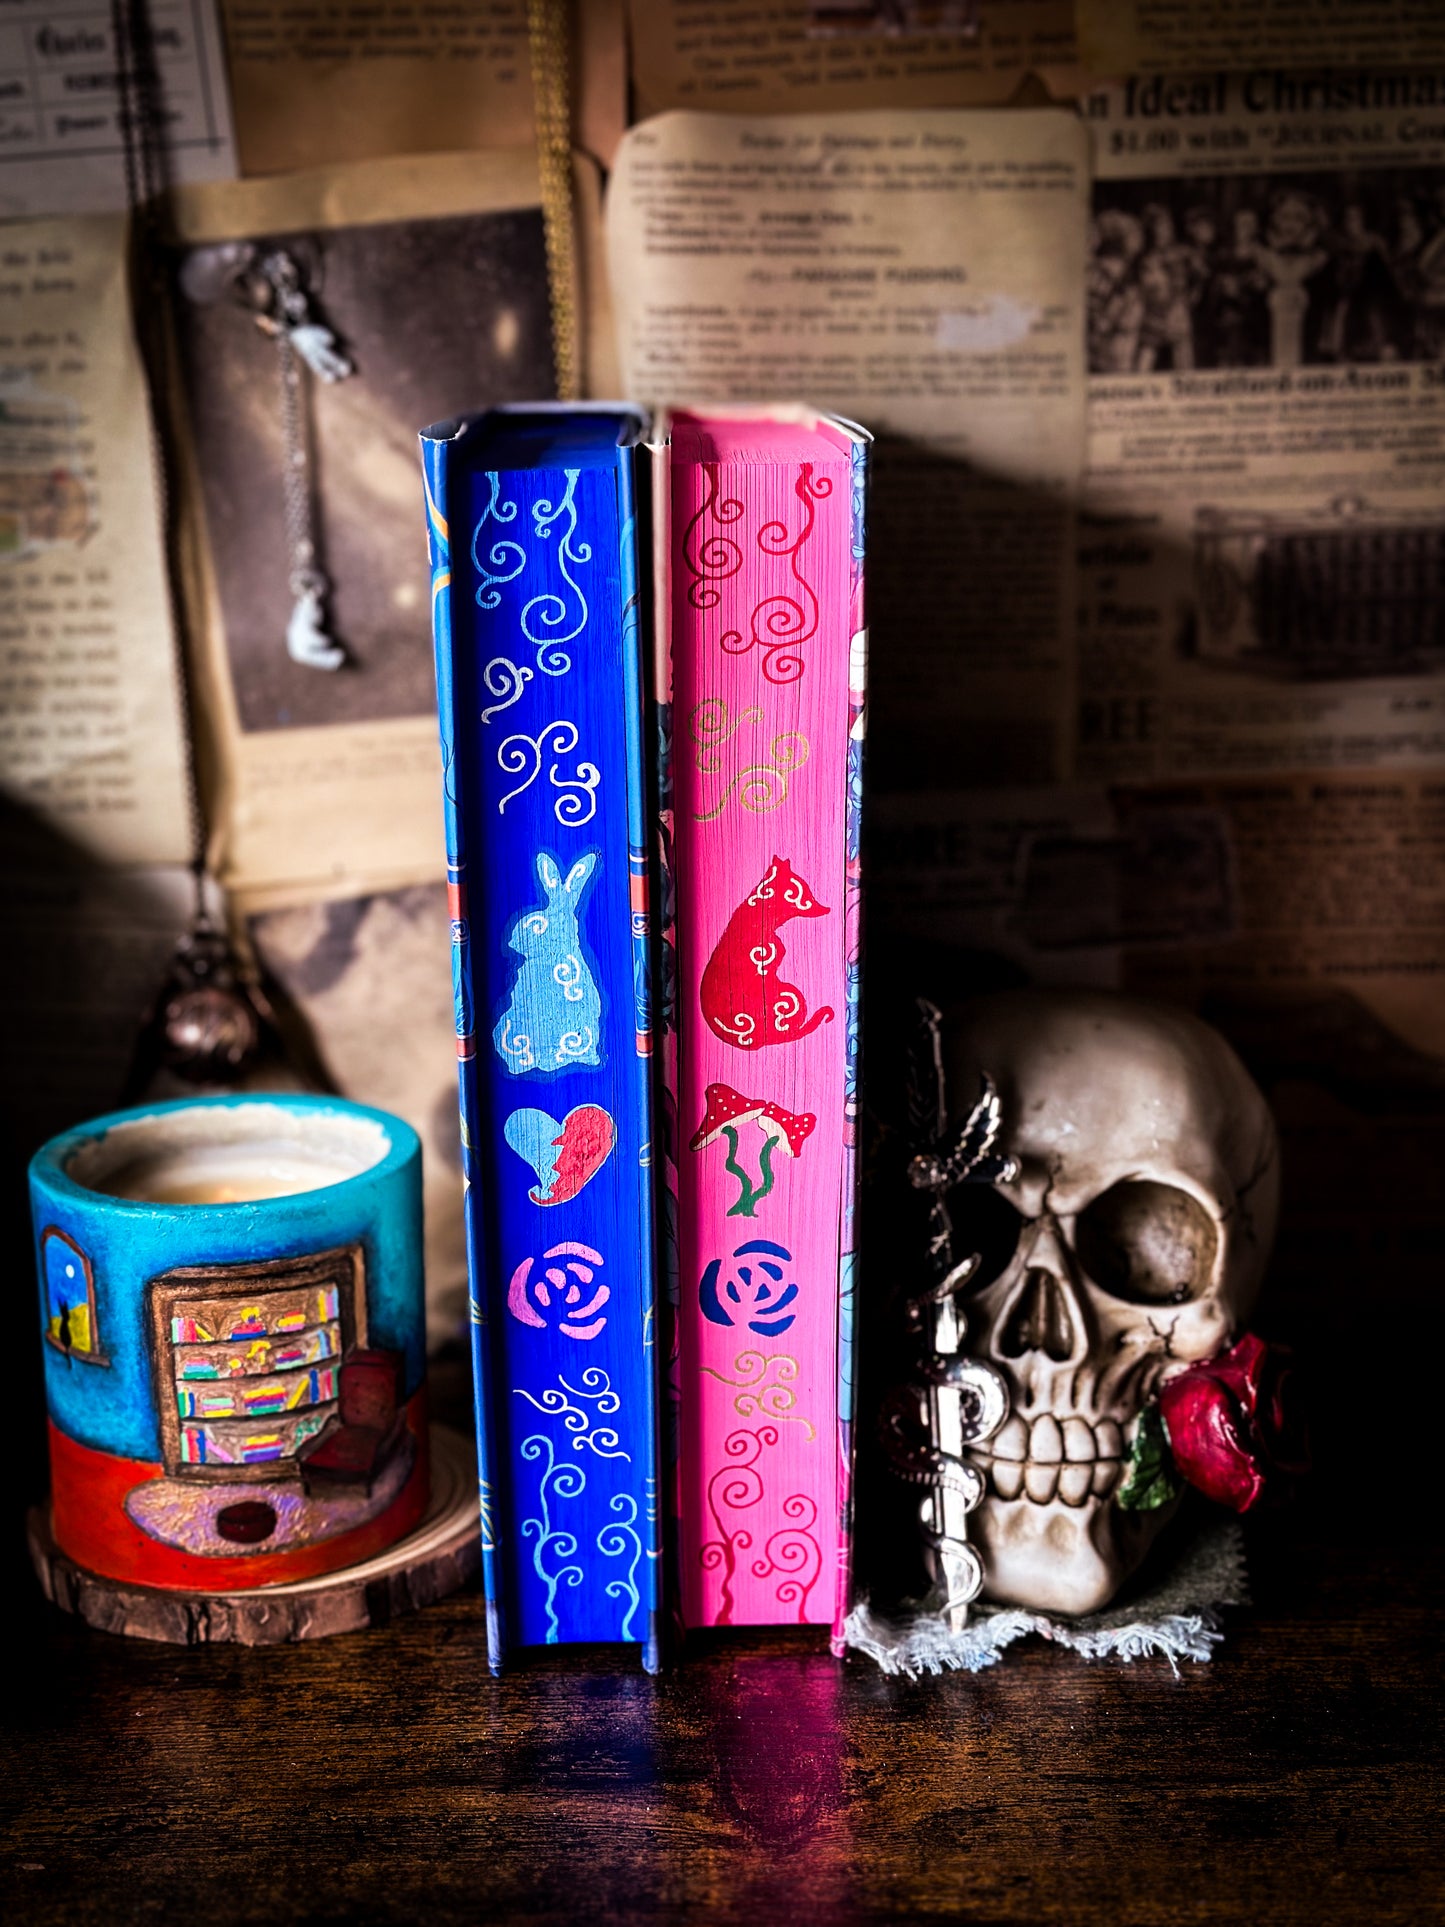 SIGNED: ONCE UPON A BROKEN HEART SERIES (UK COVERS) Hand-Painted Edges